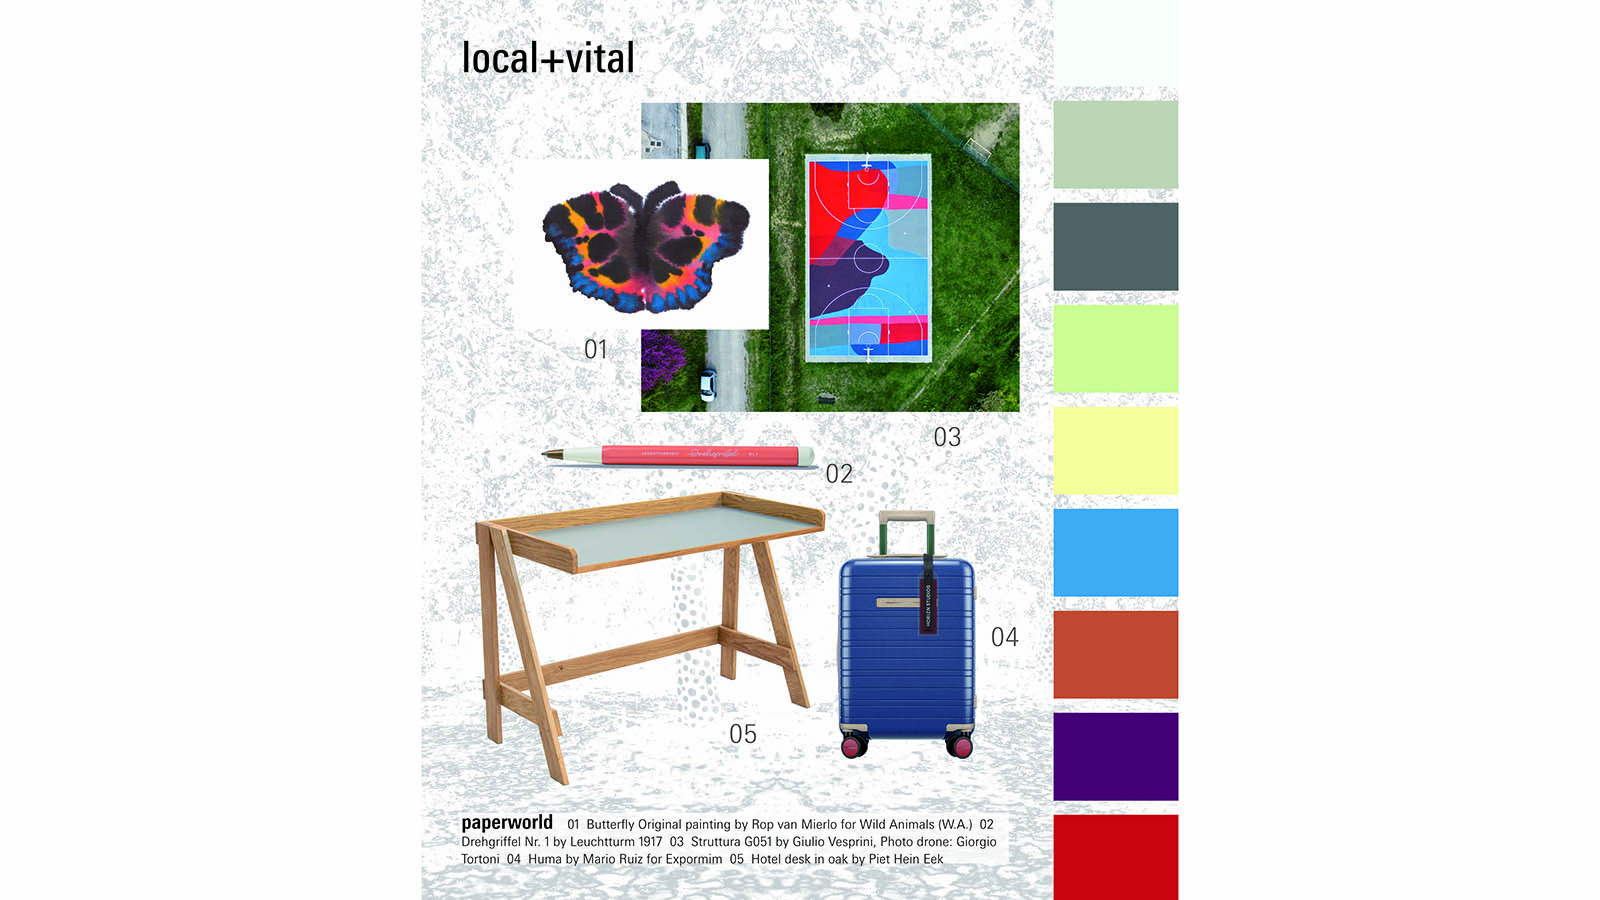 "local+vital": closeness and cheerfulness through local products and characteristic design